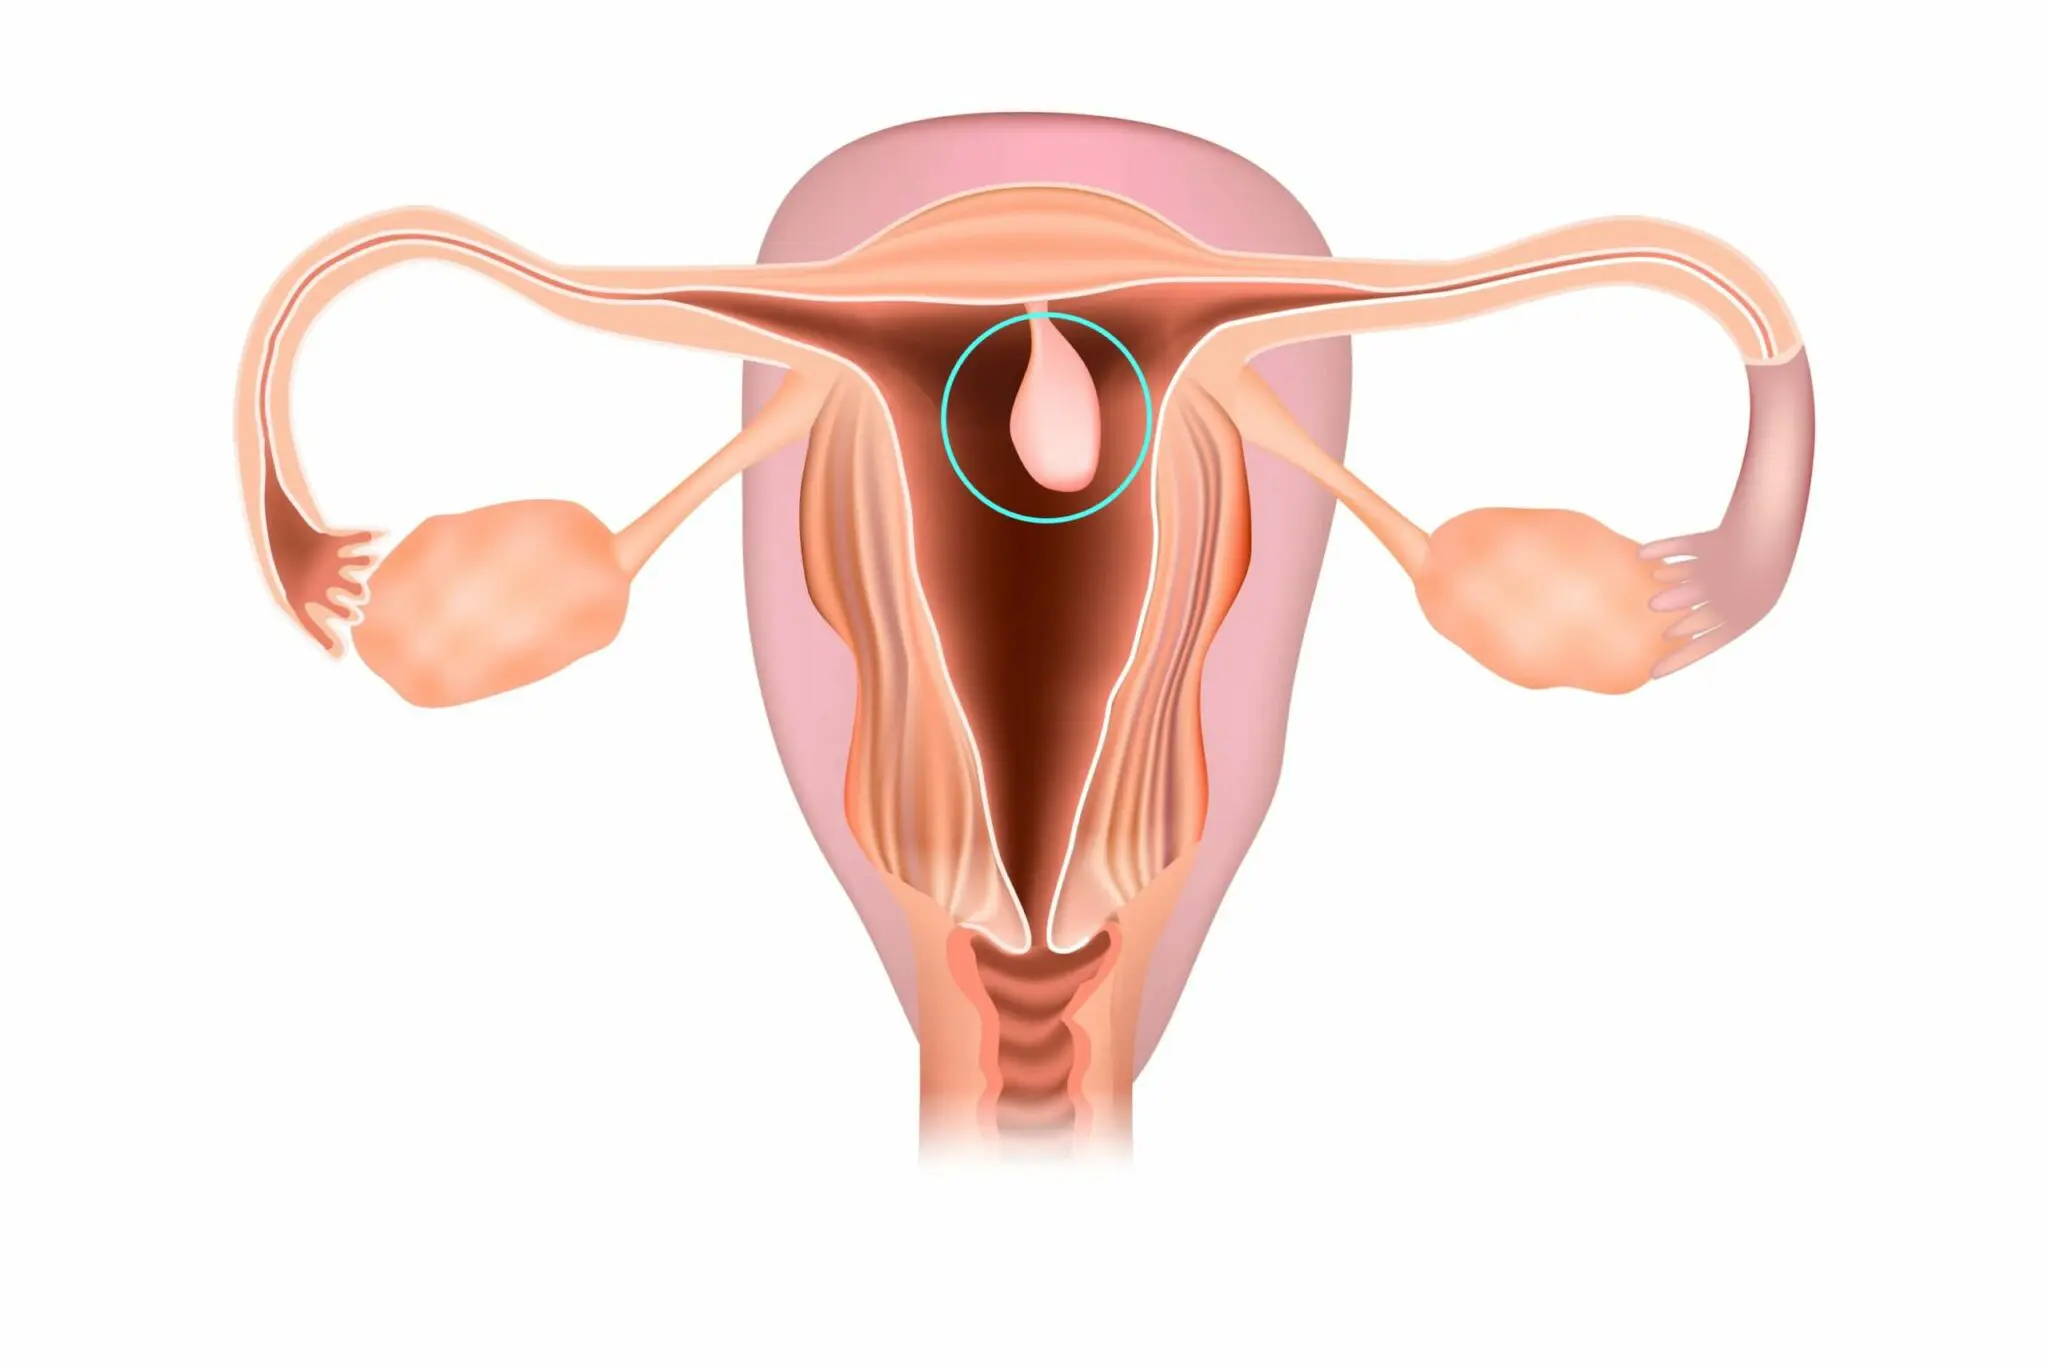 Uterine Polyps And Miscarriages